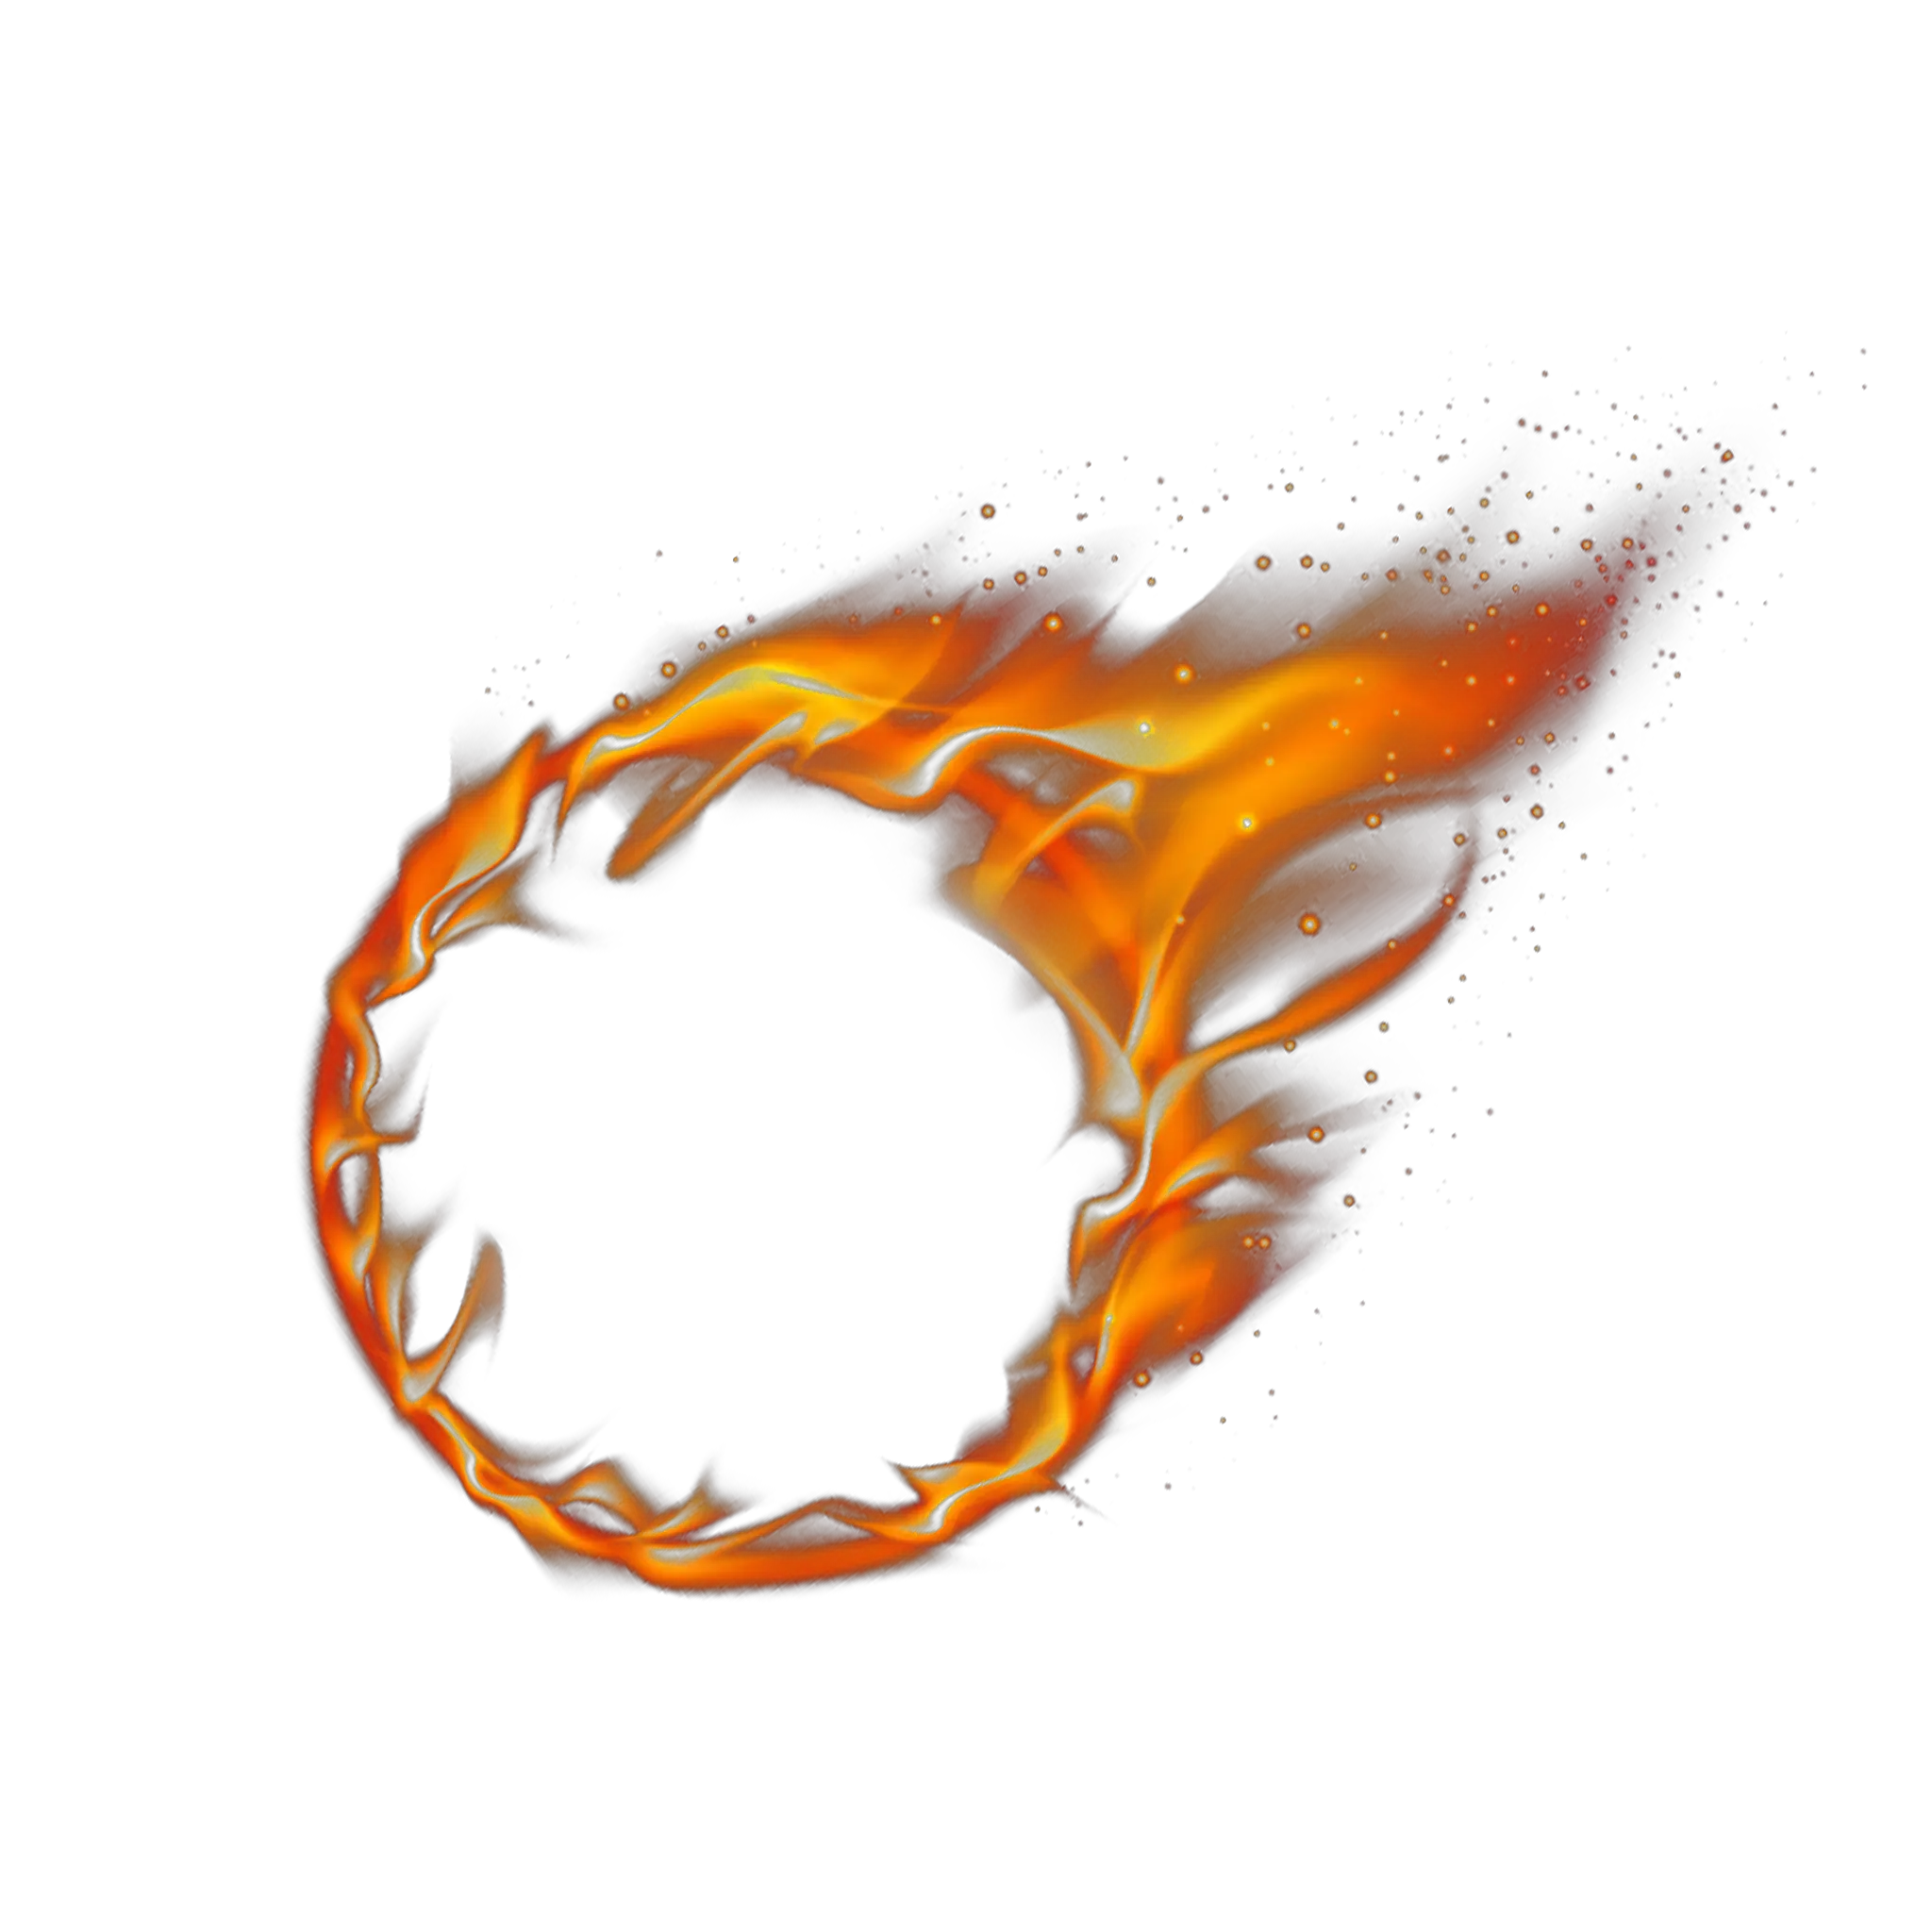 Hd Ring Of Fire Png Image Free Download Fire Images Png Hd Ring Of Fire Png